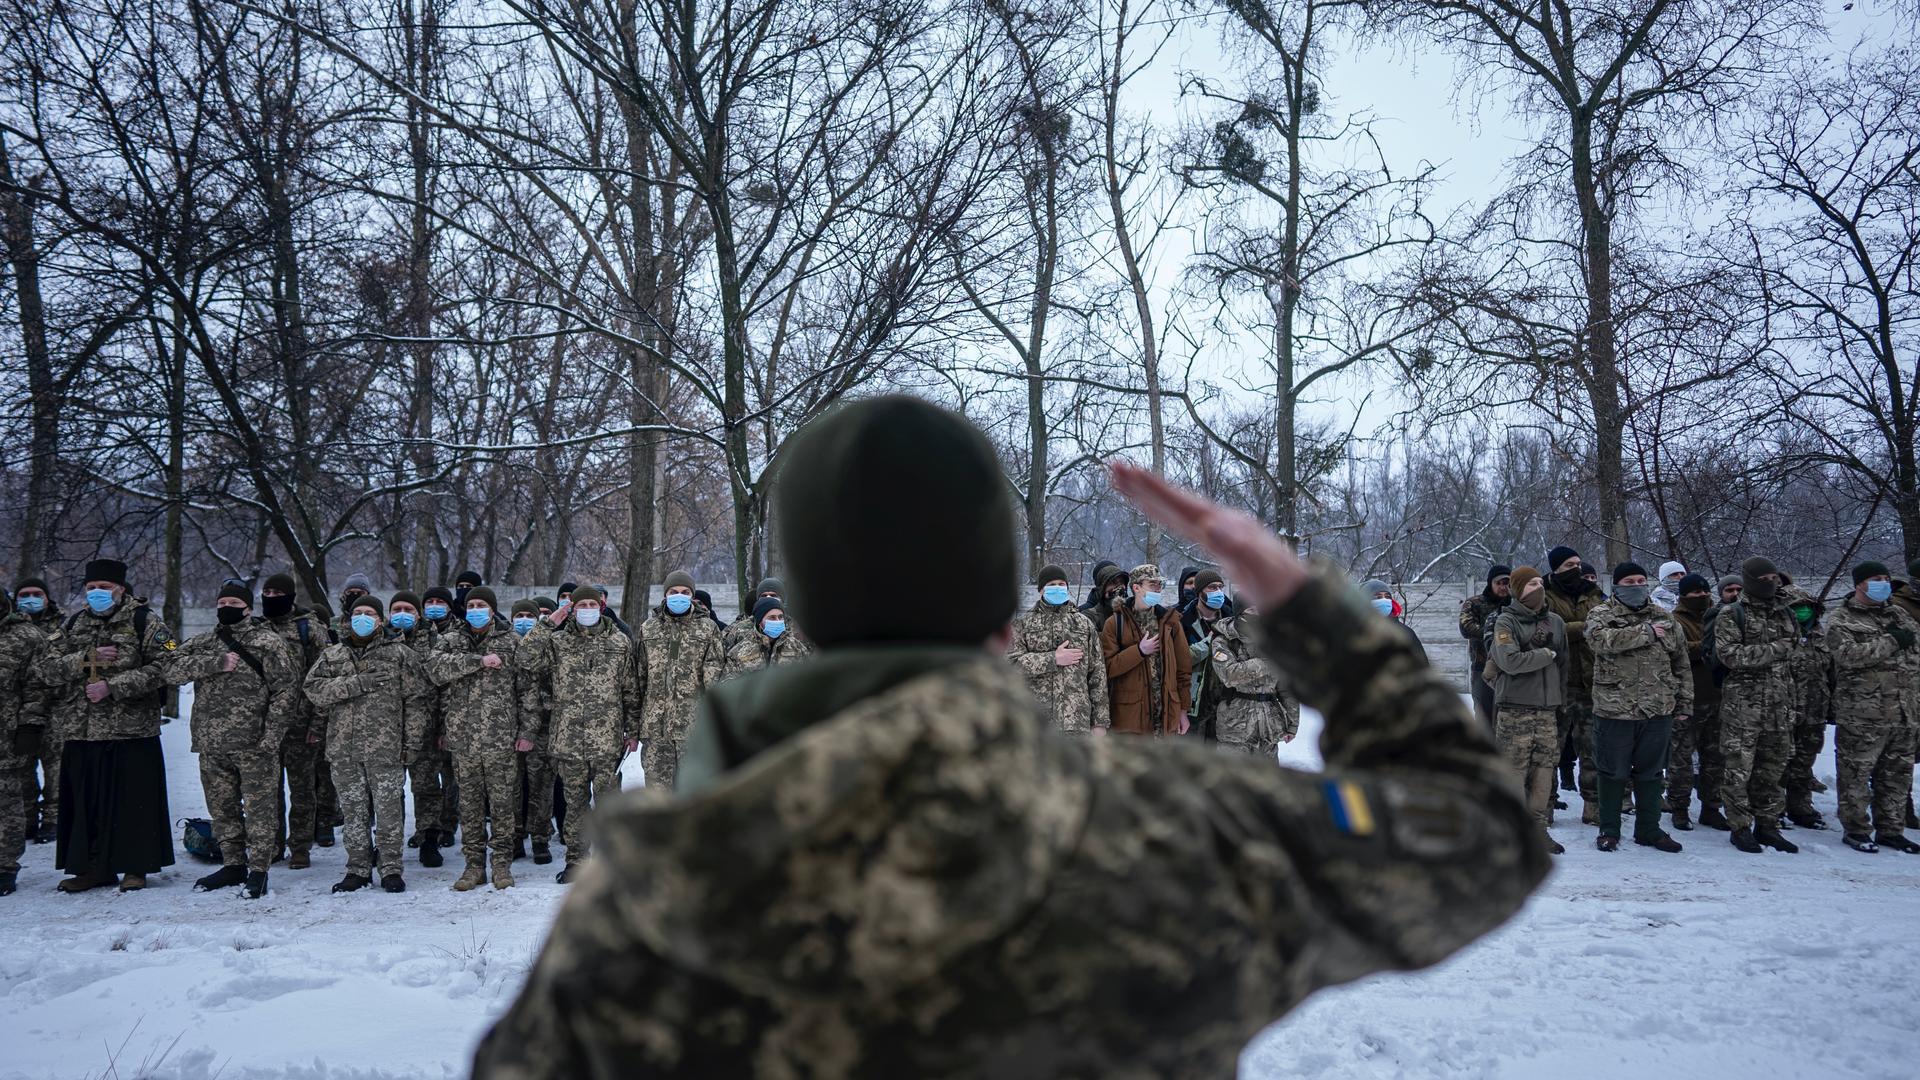 Members of Ukraine's Territorial Defense Forces, volunteer military units of the Armed Forces stay in line before training in Kharkiv, Ukraine, Jan. 29, 2022. Some people in Ukraine's second-largest city are preparing to fight back if Russia invades. Khar